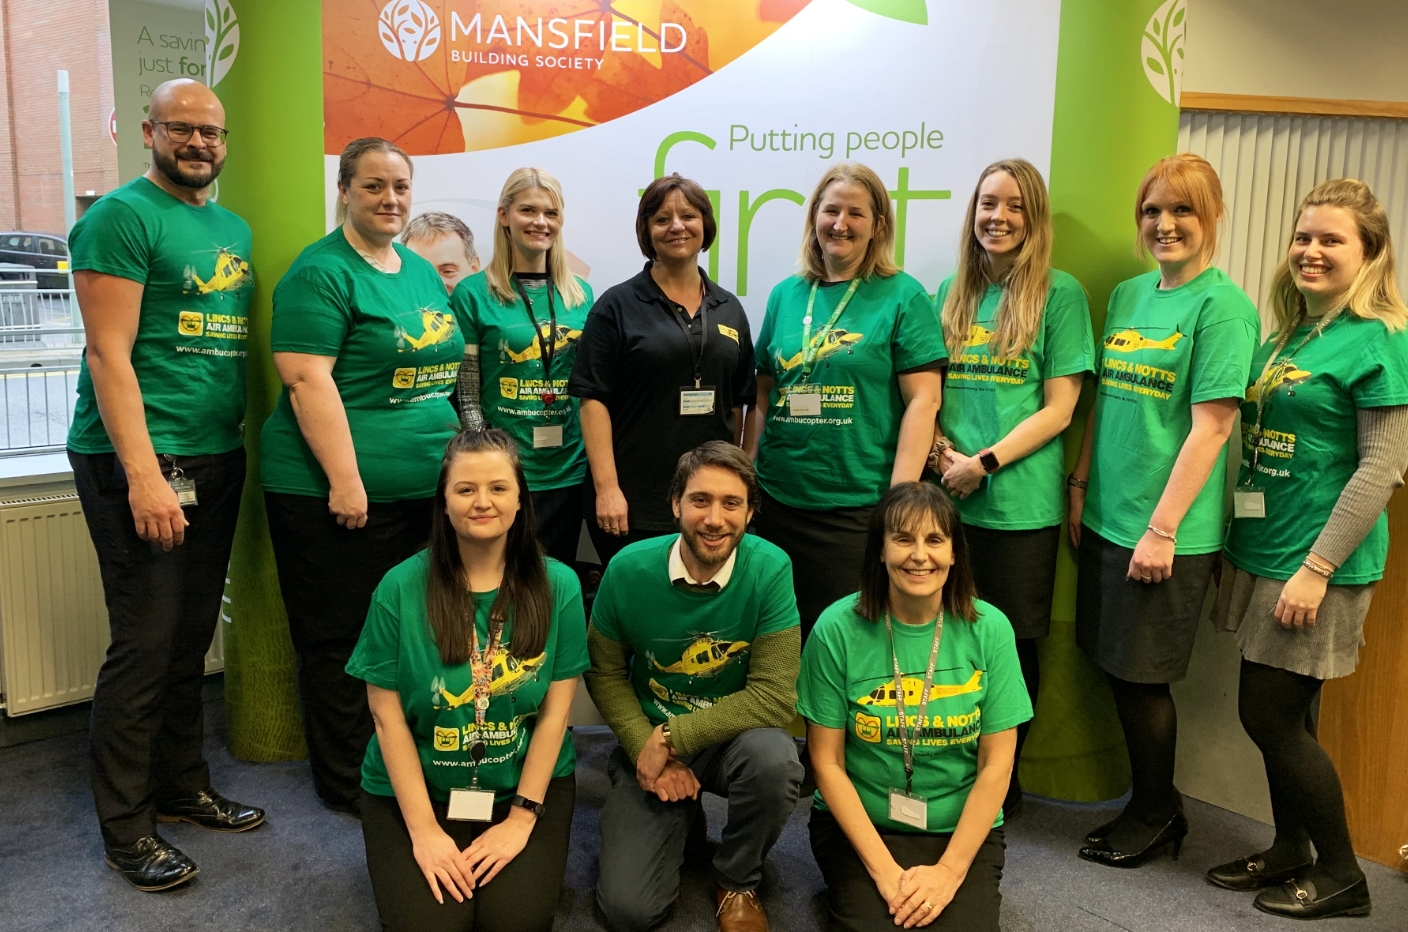 Mansfield building society, one of our business partnerships, with LNAA staff member.